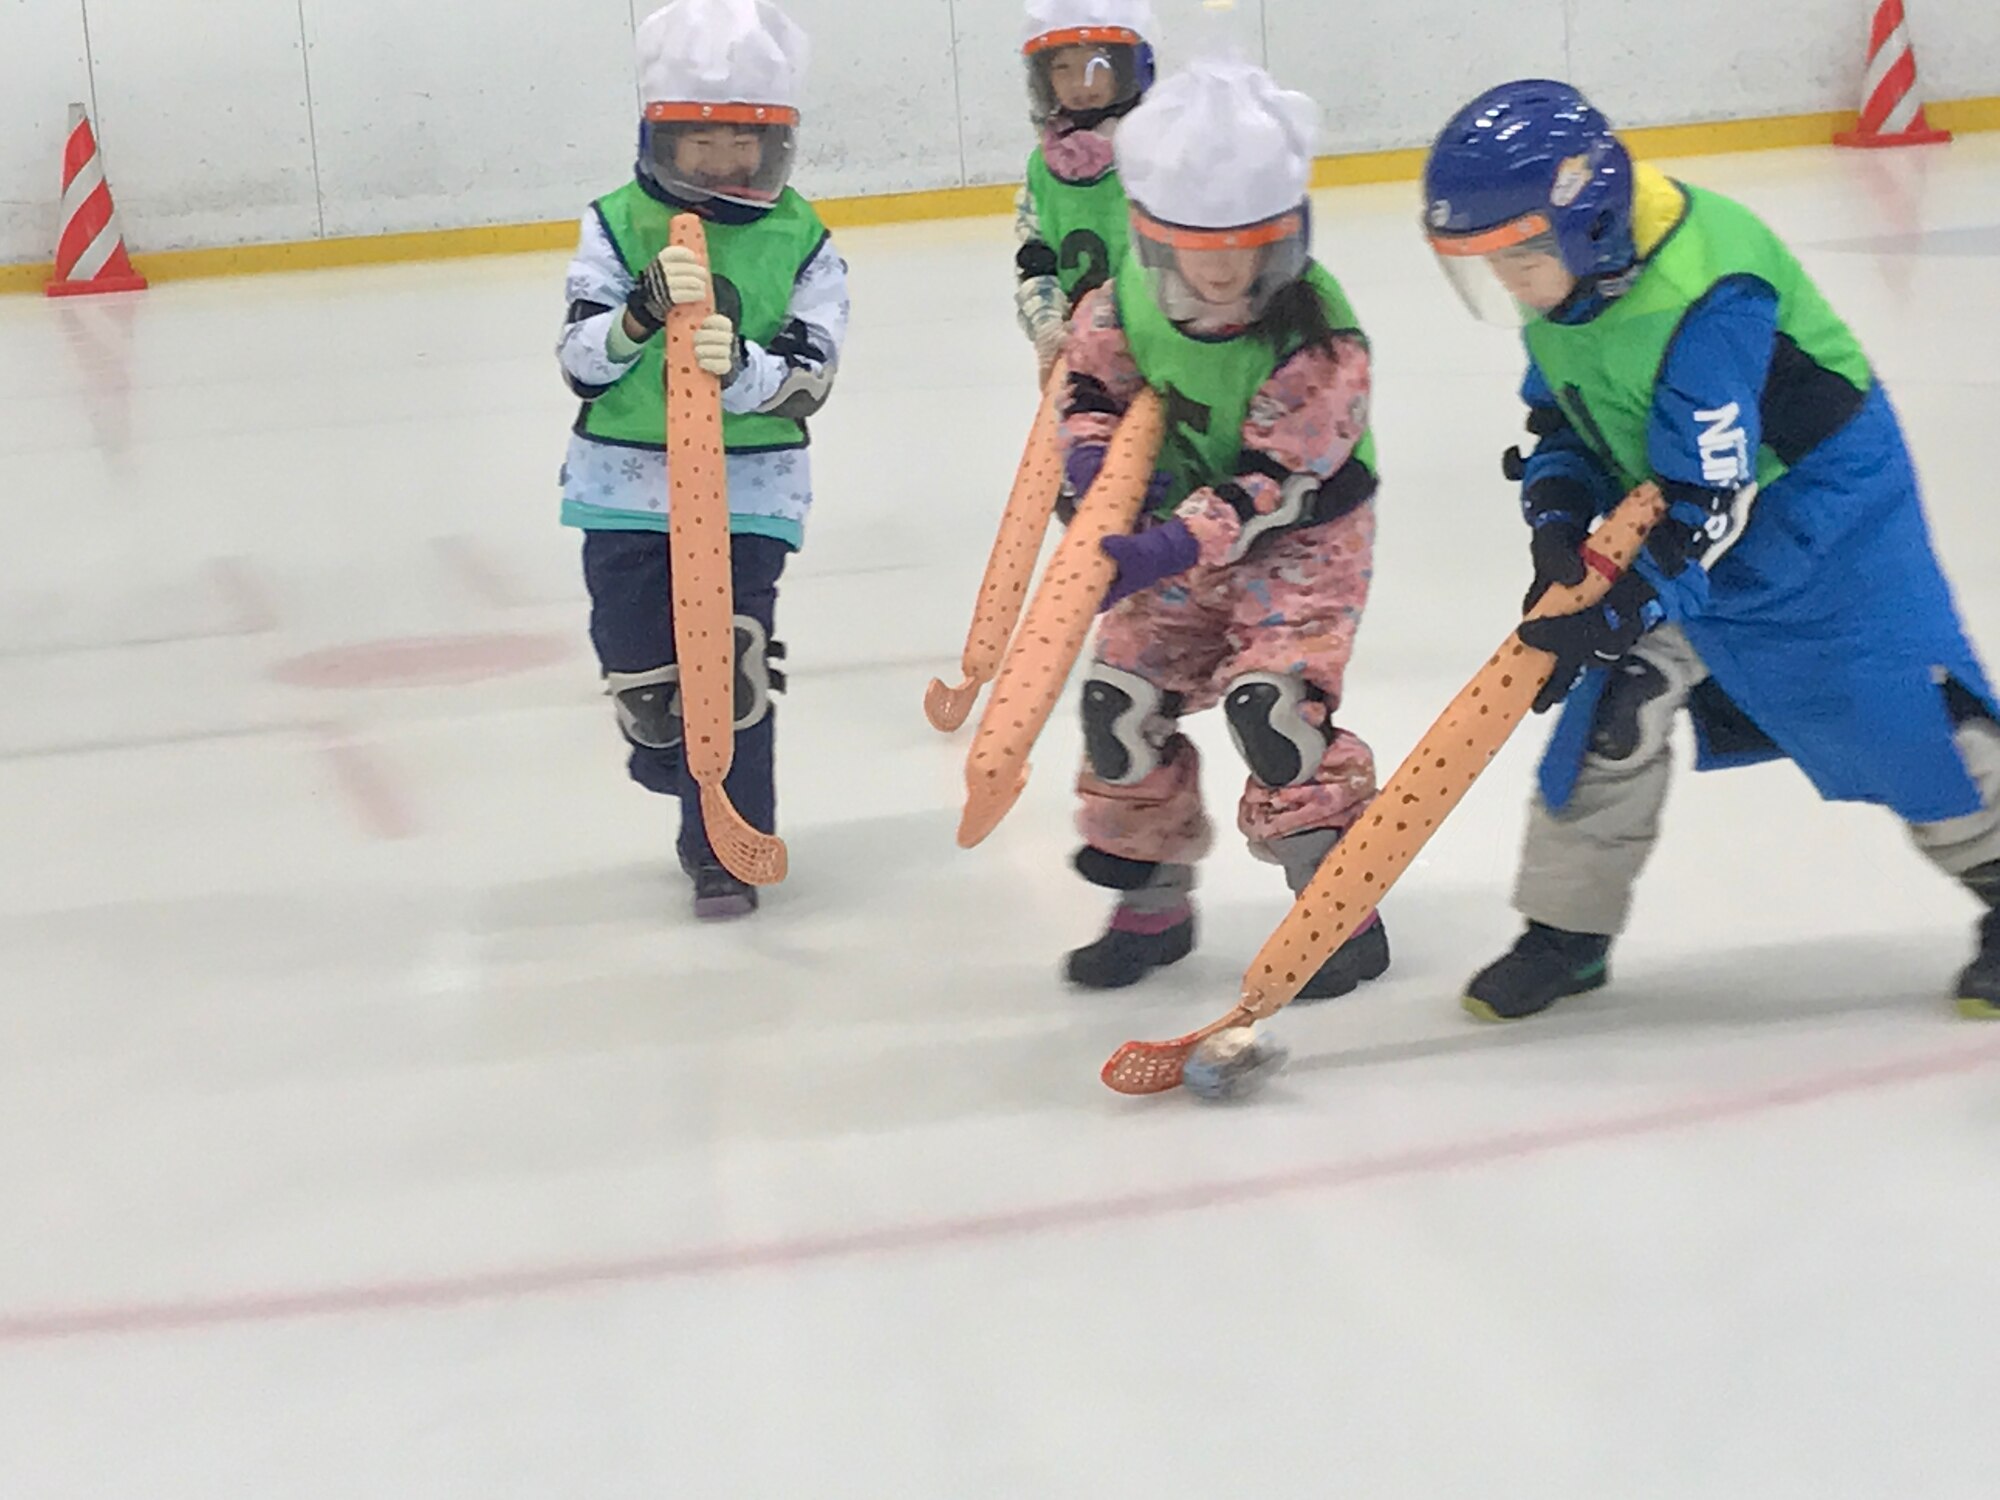 Misawa City and Misawa Air Base kids compete in the 6th Misawa Ice Hockey Exhibition.